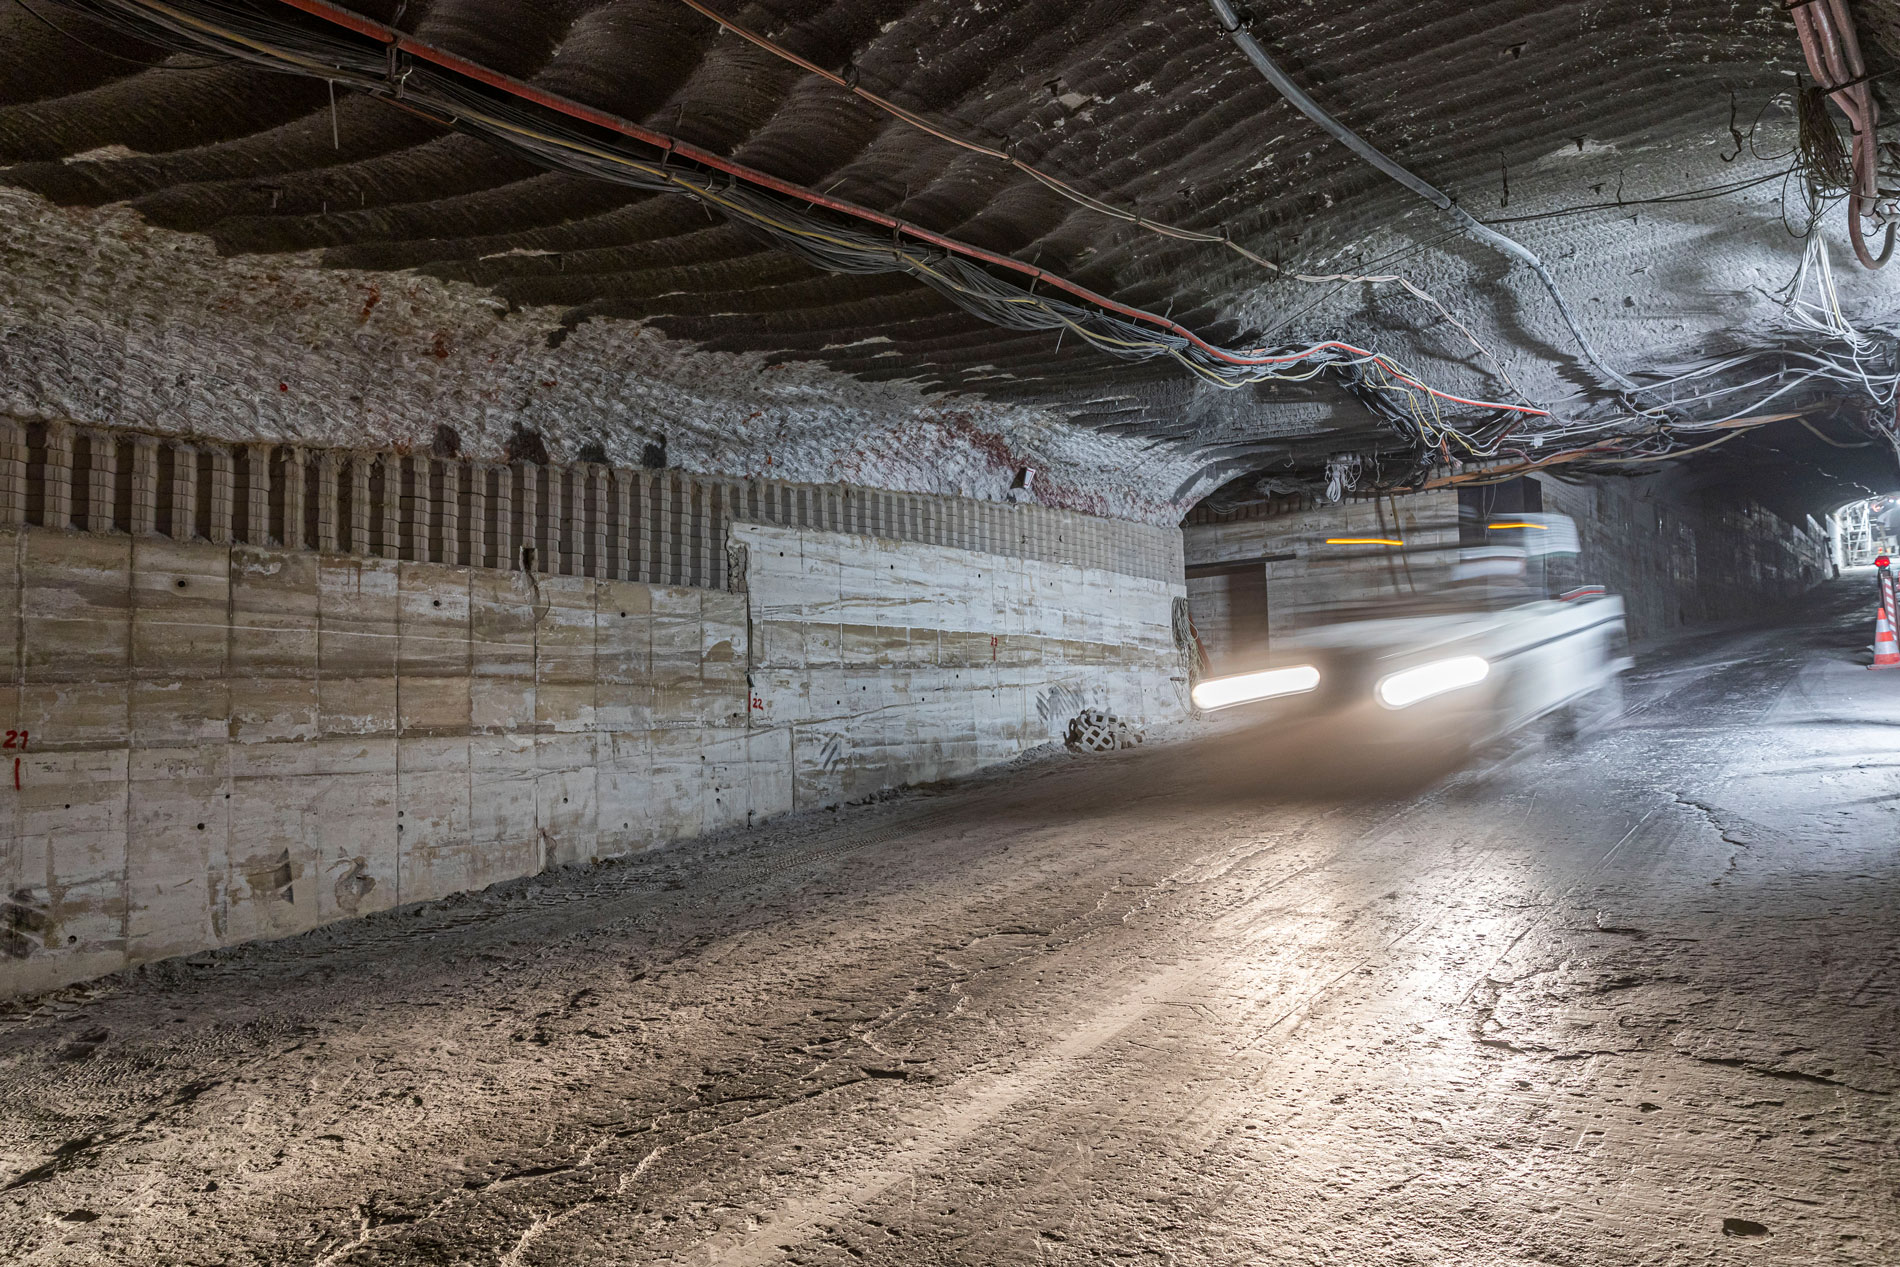 A vehicle drives on an underground route through the Asse II mine